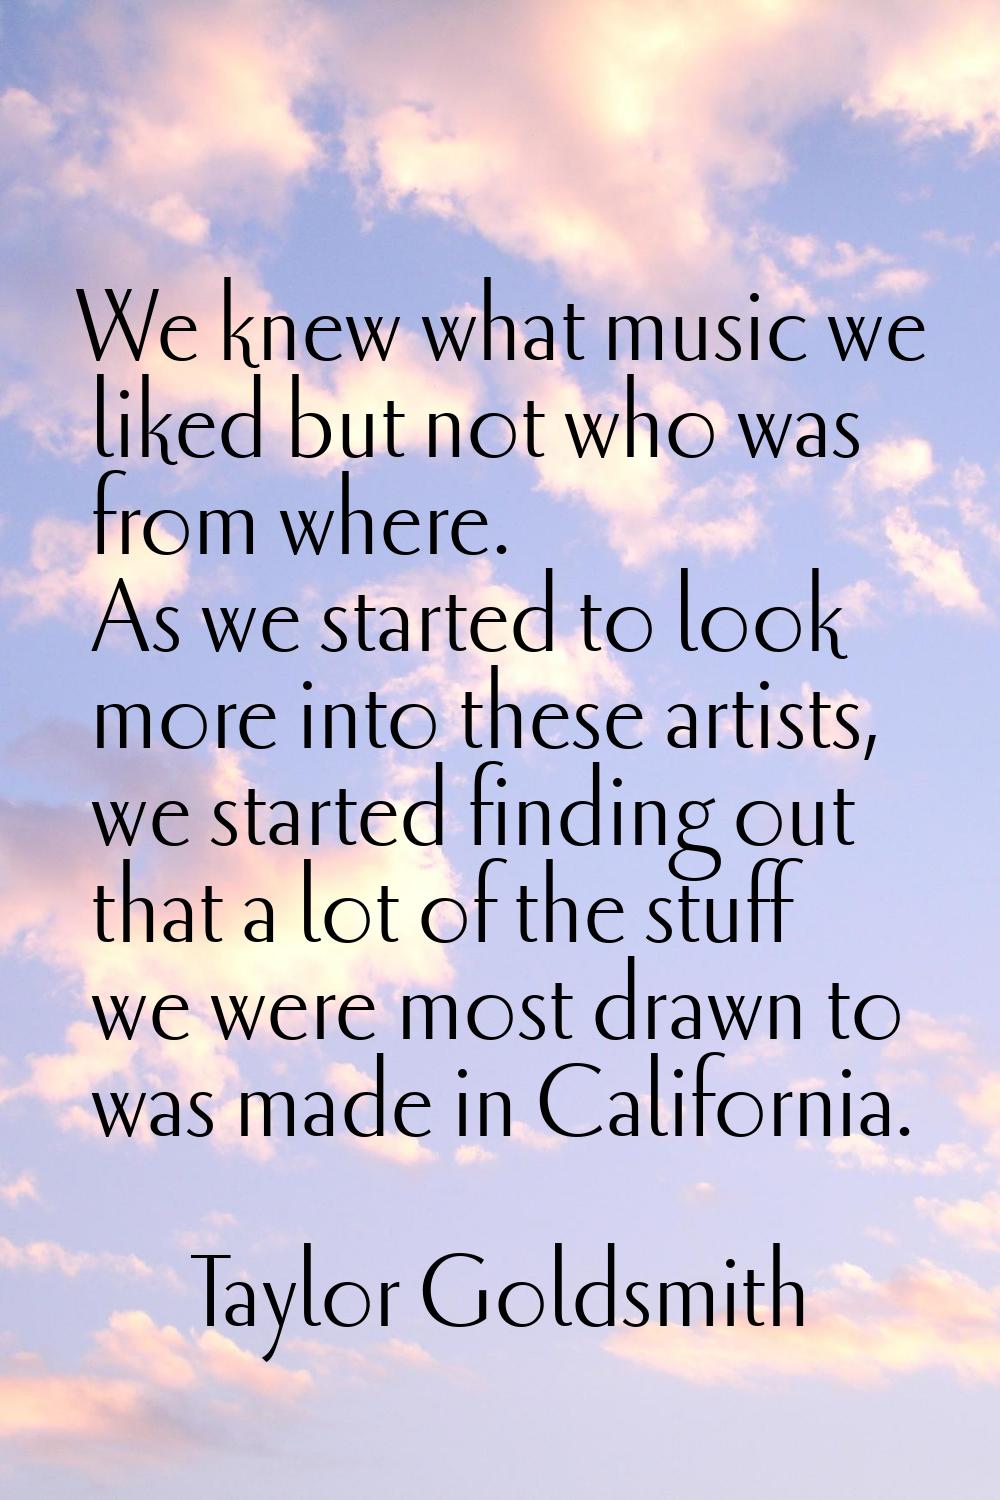 We knew what music we liked but not who was from where. As we started to look more into these artis